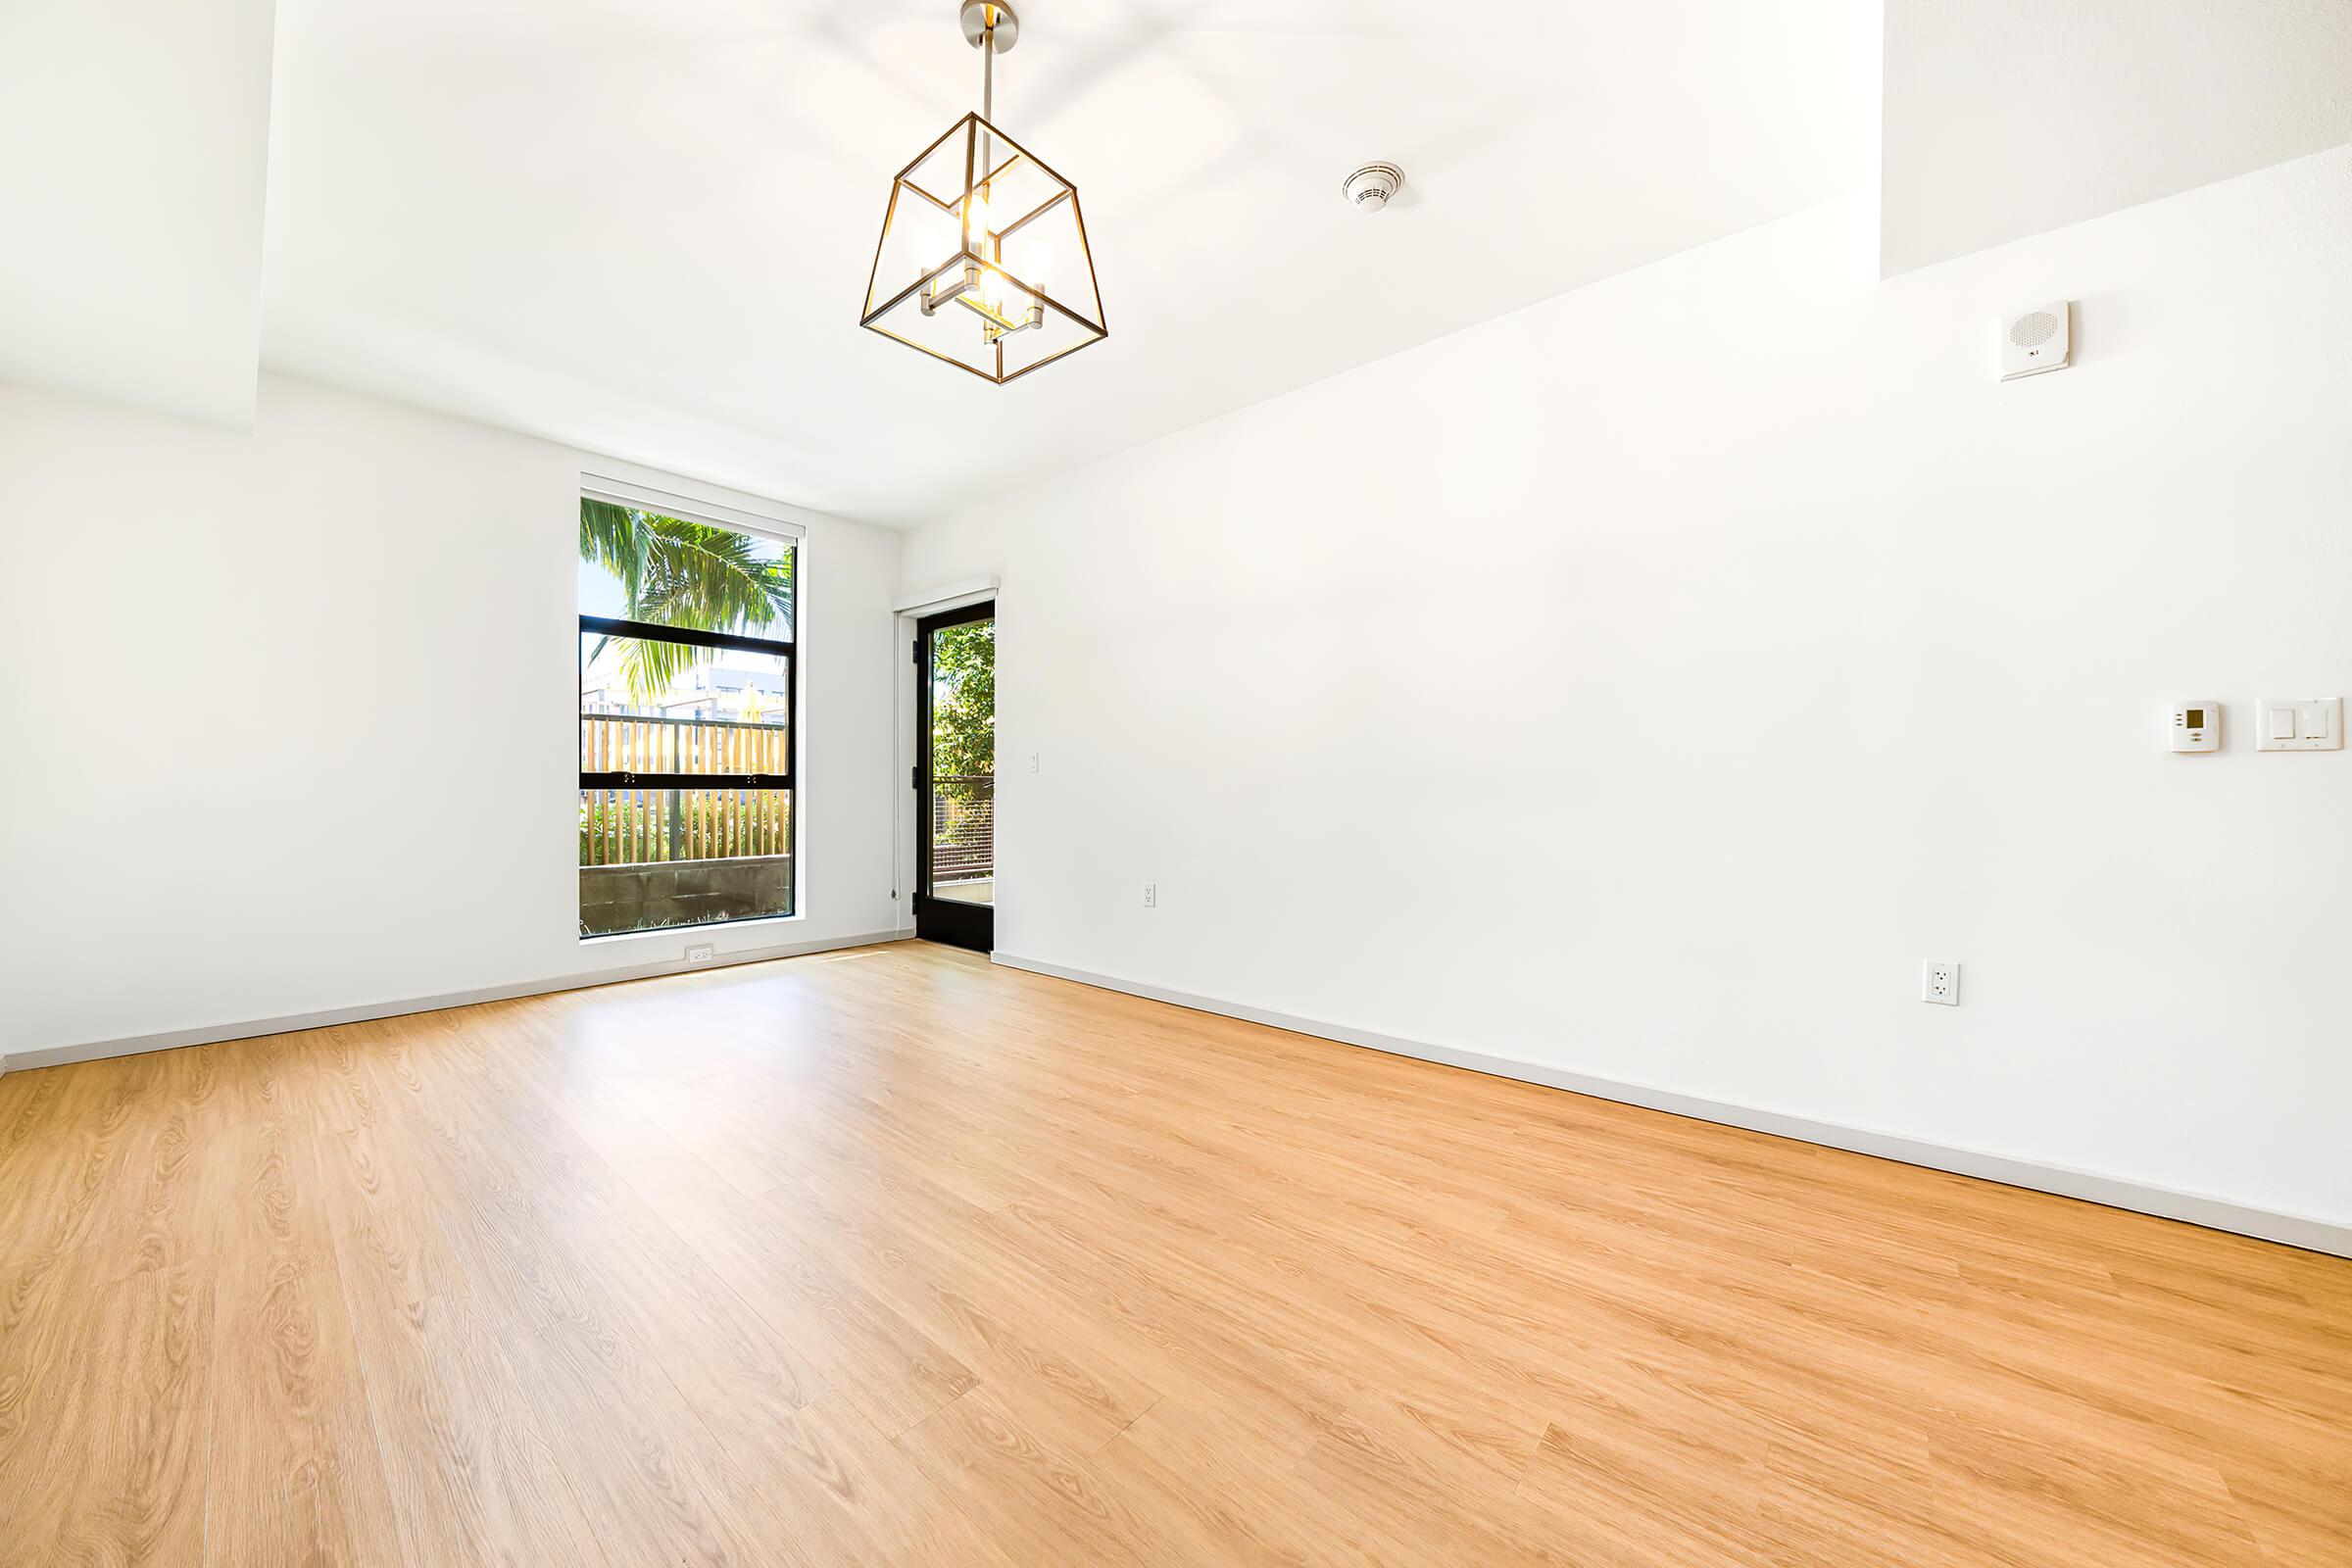 vacant living room with wooden floors